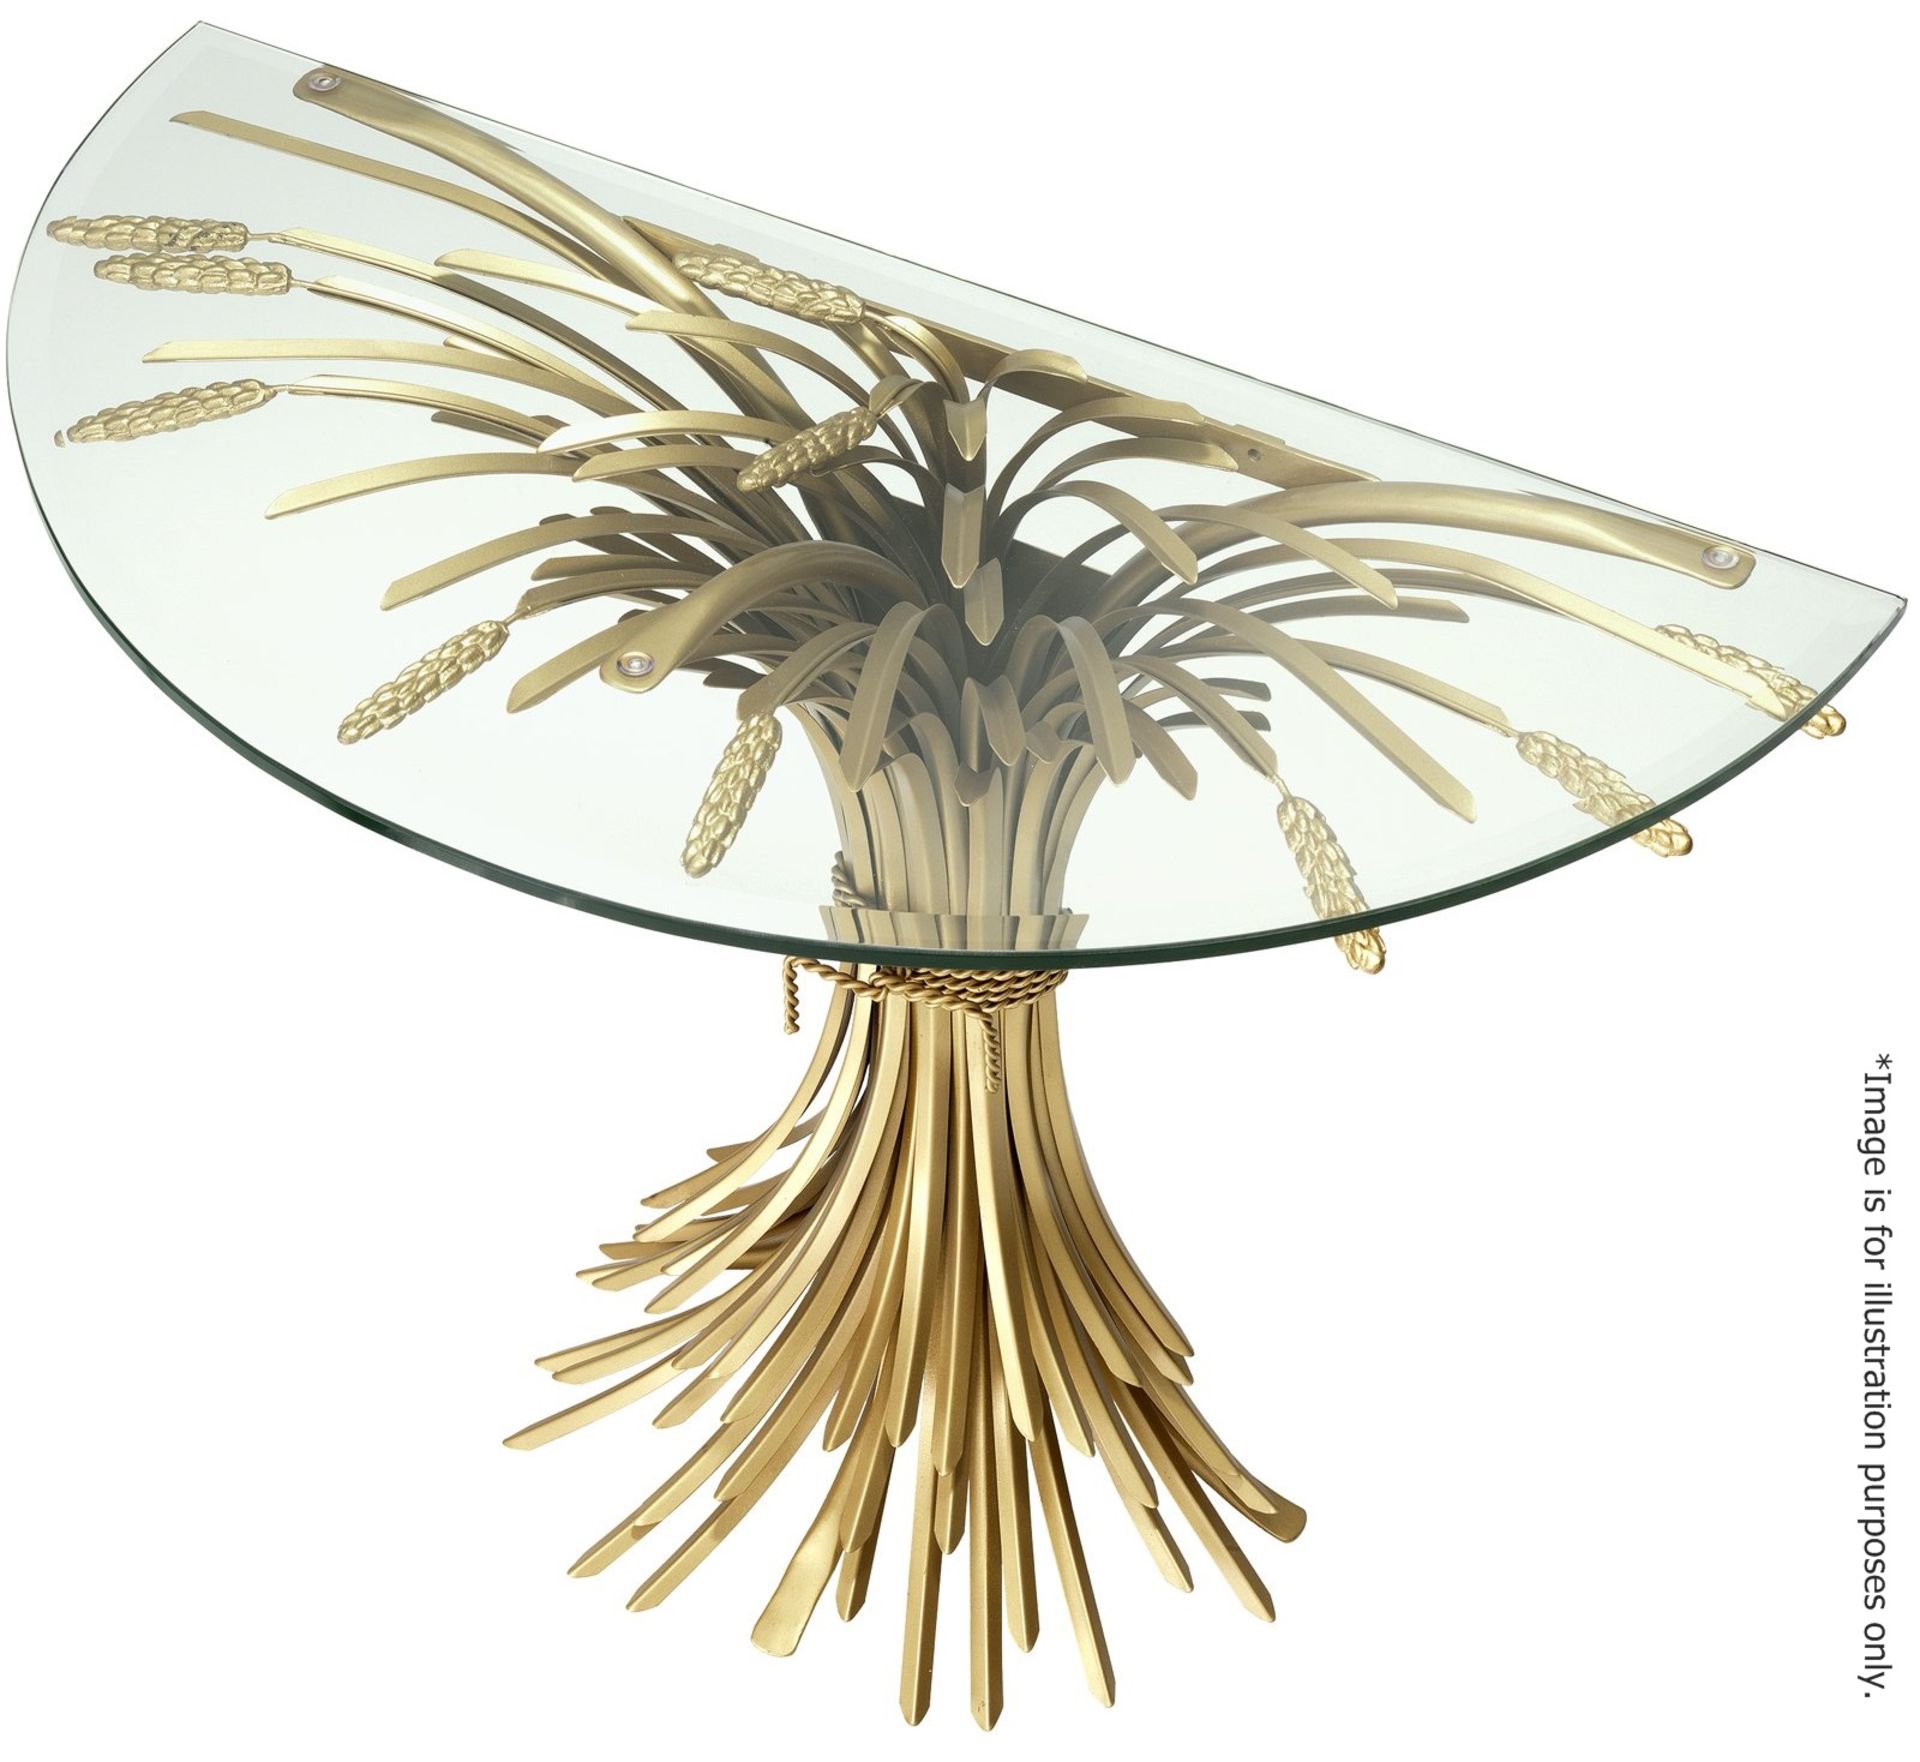 1 x EICHHOLTZ 'Bonheur' Glass-topped Iron Console Table With An Antique Gold Finish - RRP £1,585 - Image 2 of 9